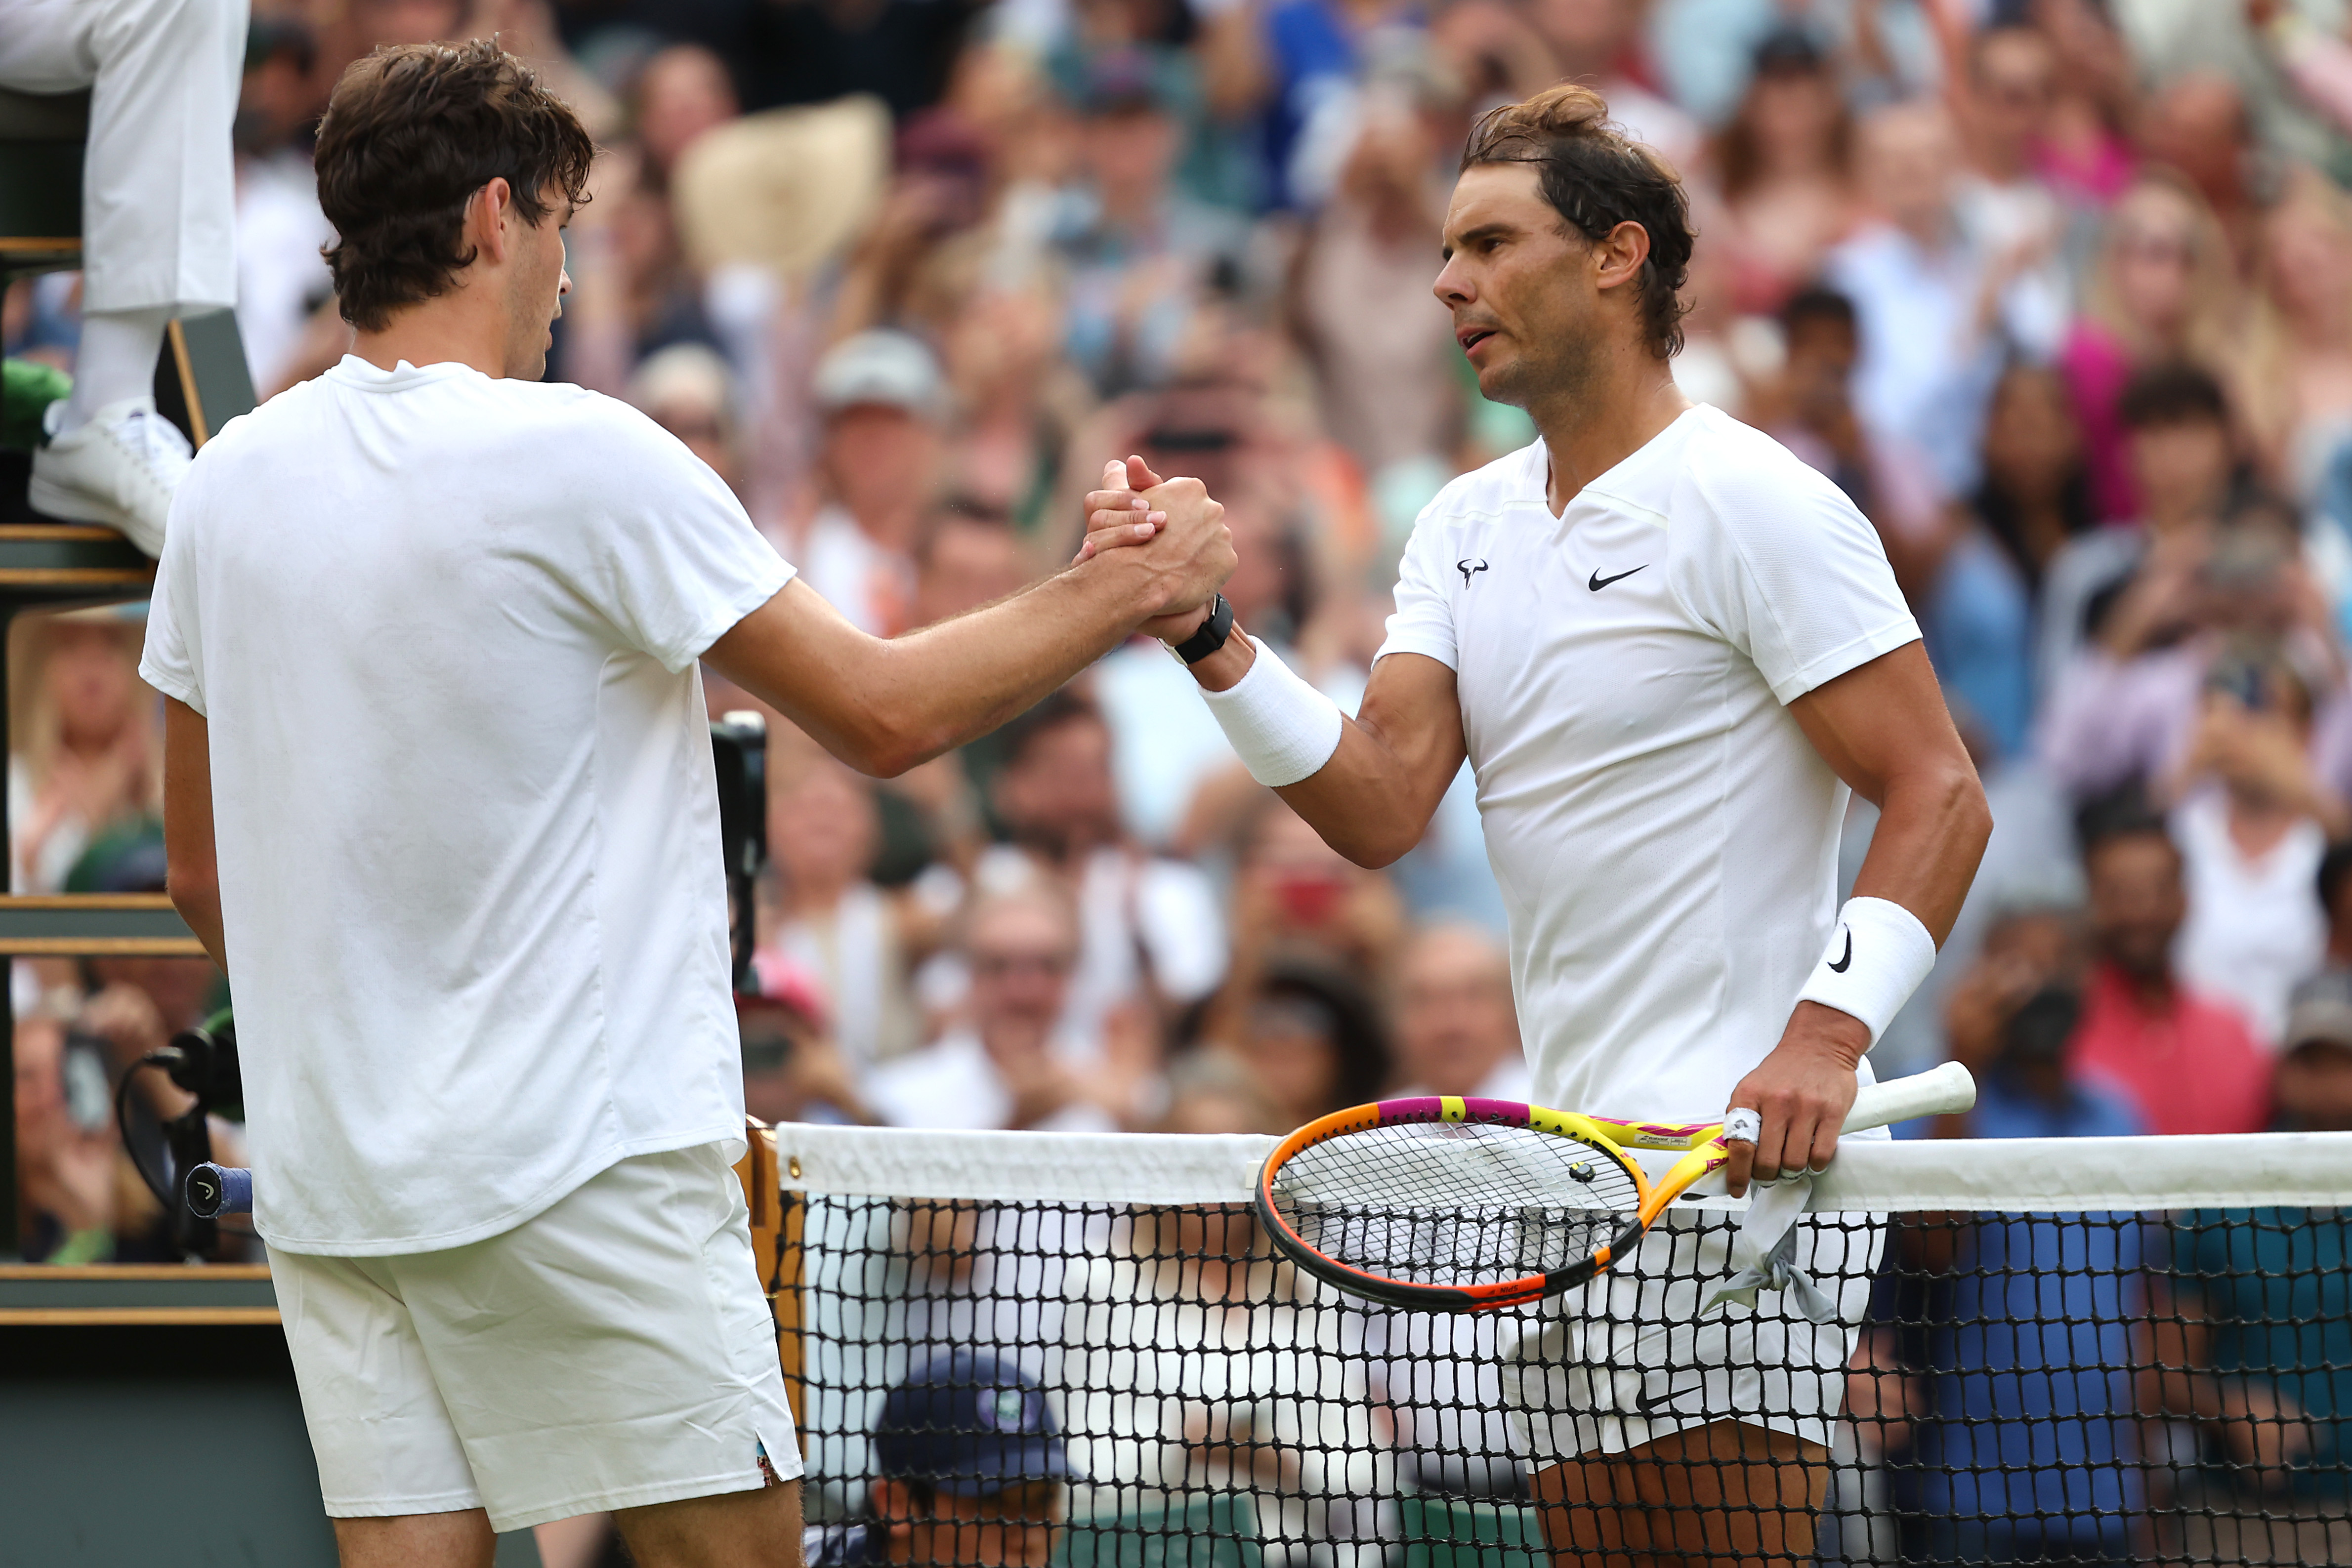 Wimbledon 2022 LIVE Watch Simona Halep, Rafael Nadal and Nick Kyrgios and follow scores, commentary and updates - Live